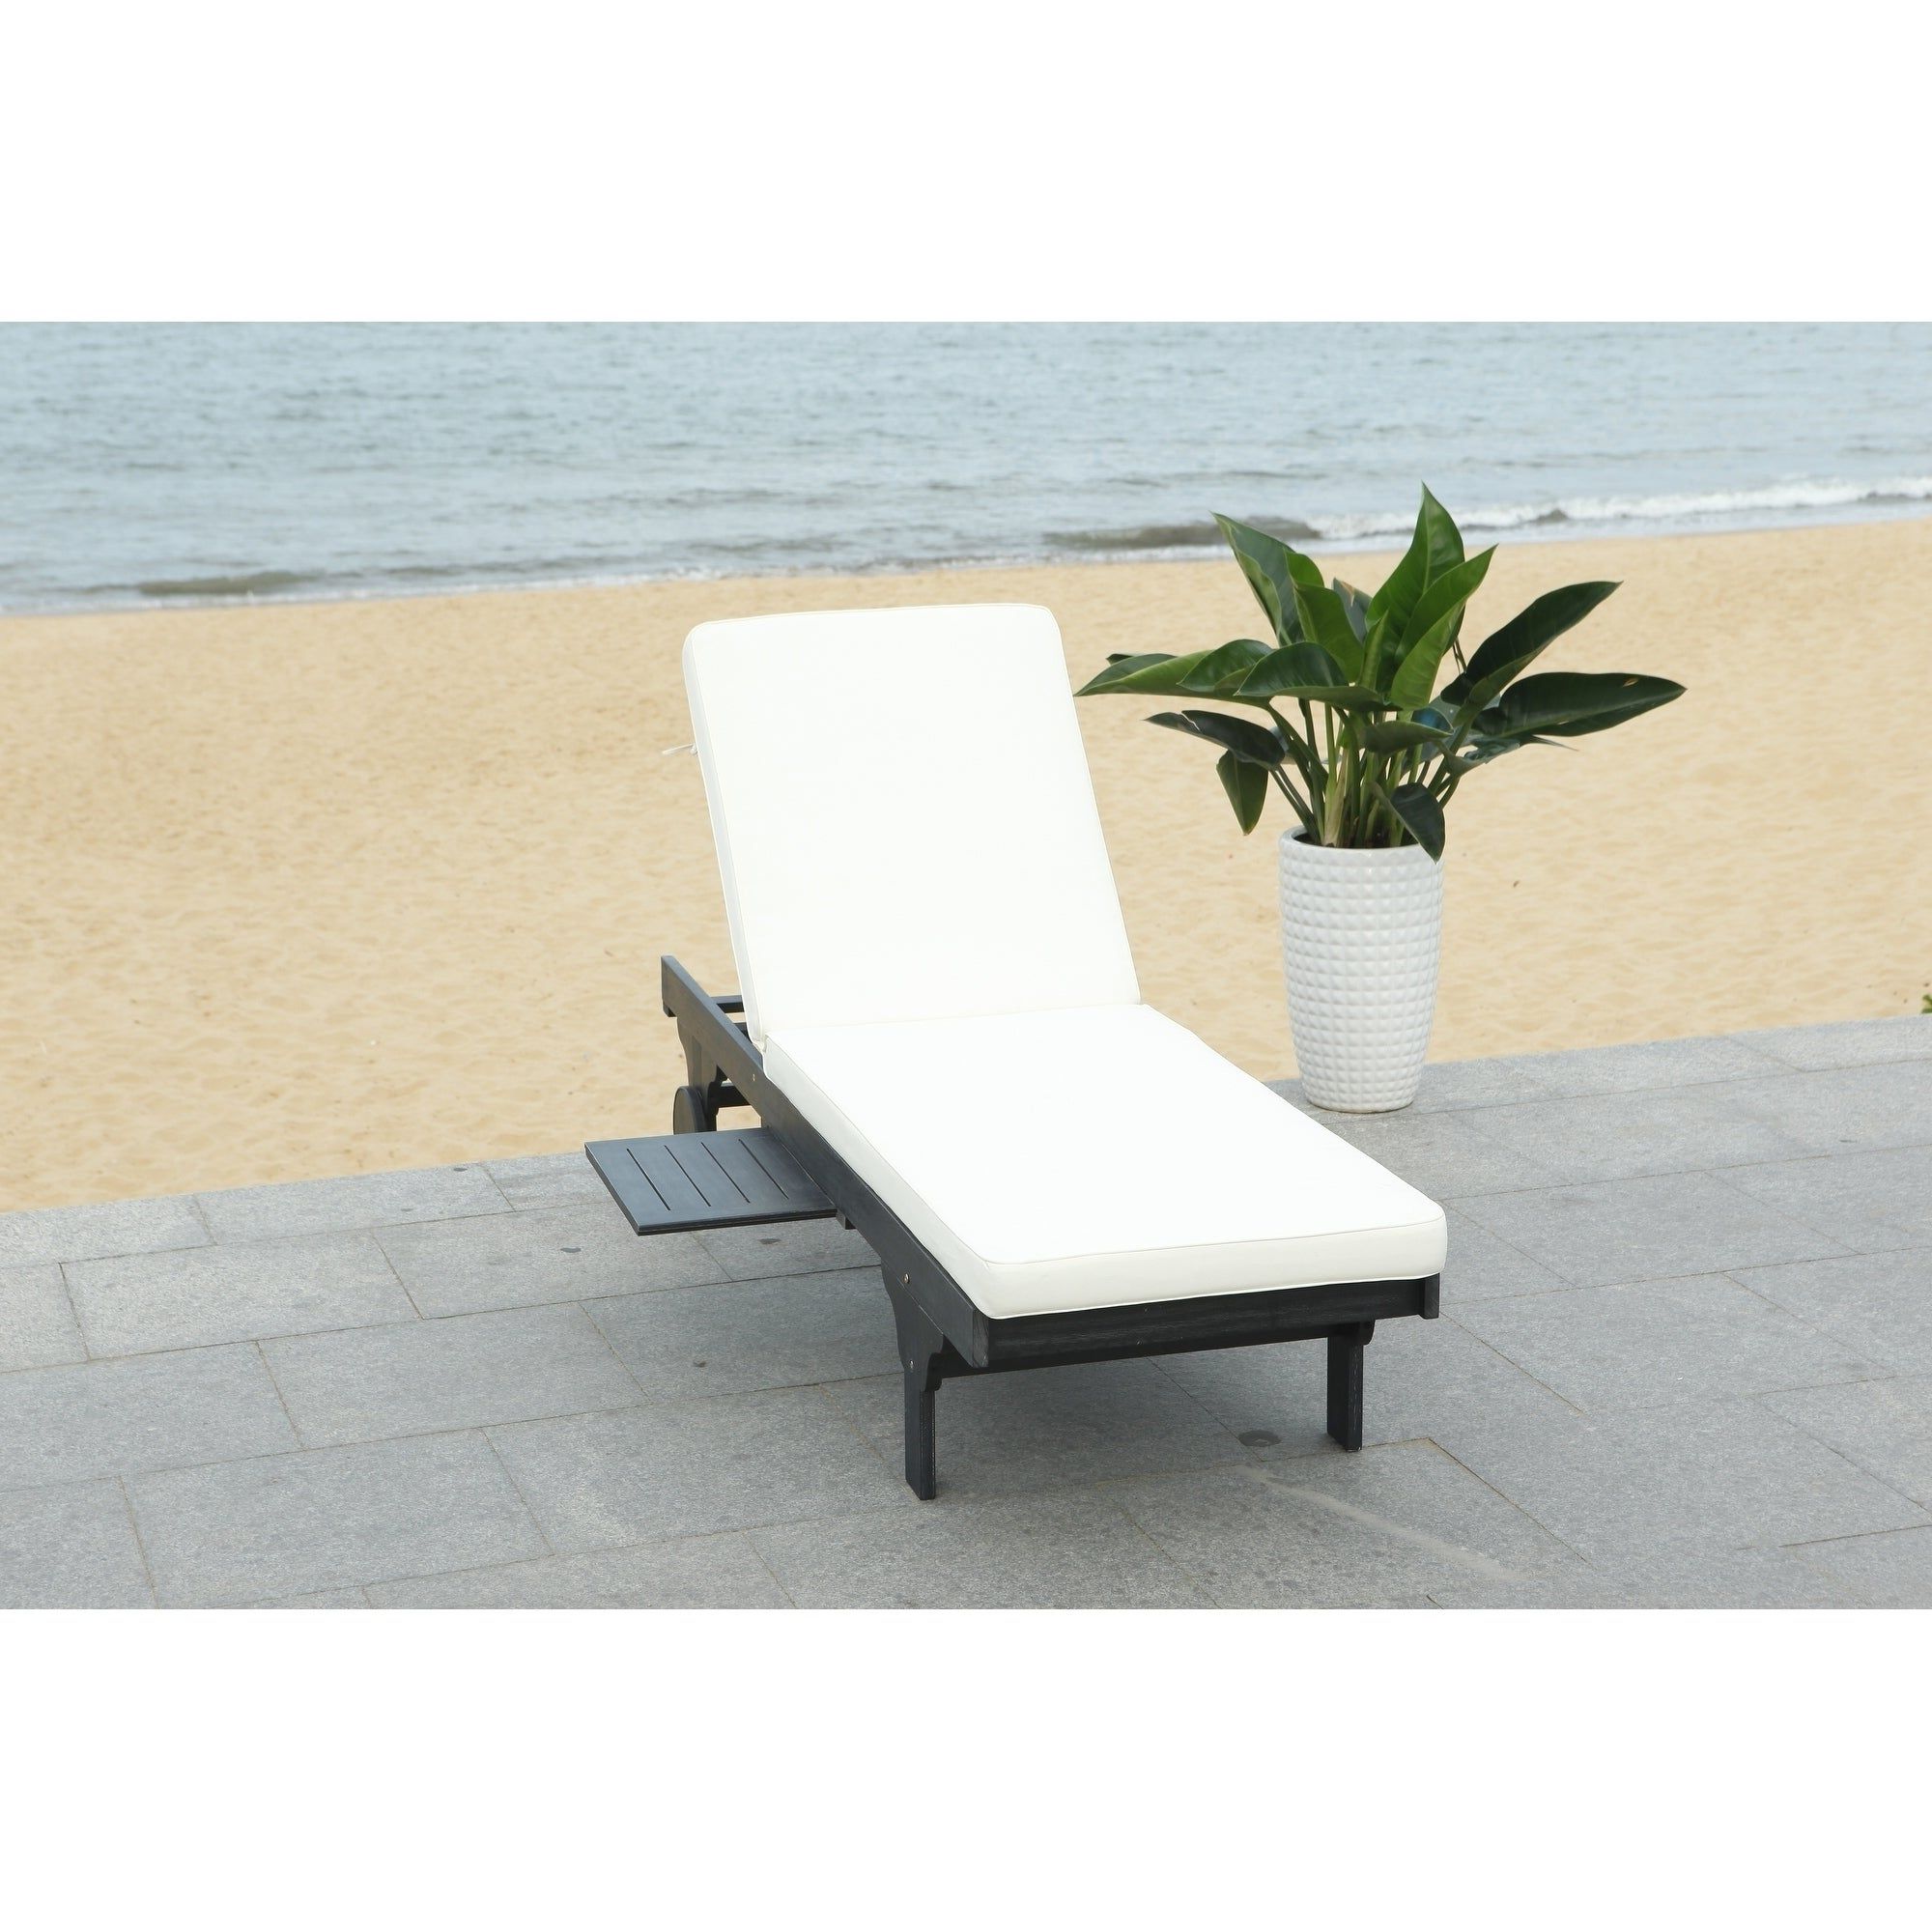 Preferred Cart Wheel Adjustable Chaise Lounge Chairs Within Safavieh Outdoor Living Newport Black/ White Cart Wheel Adjustable Chaise  Lounge Chair – 27.6" X 78.7" X  (View 4 of 25)